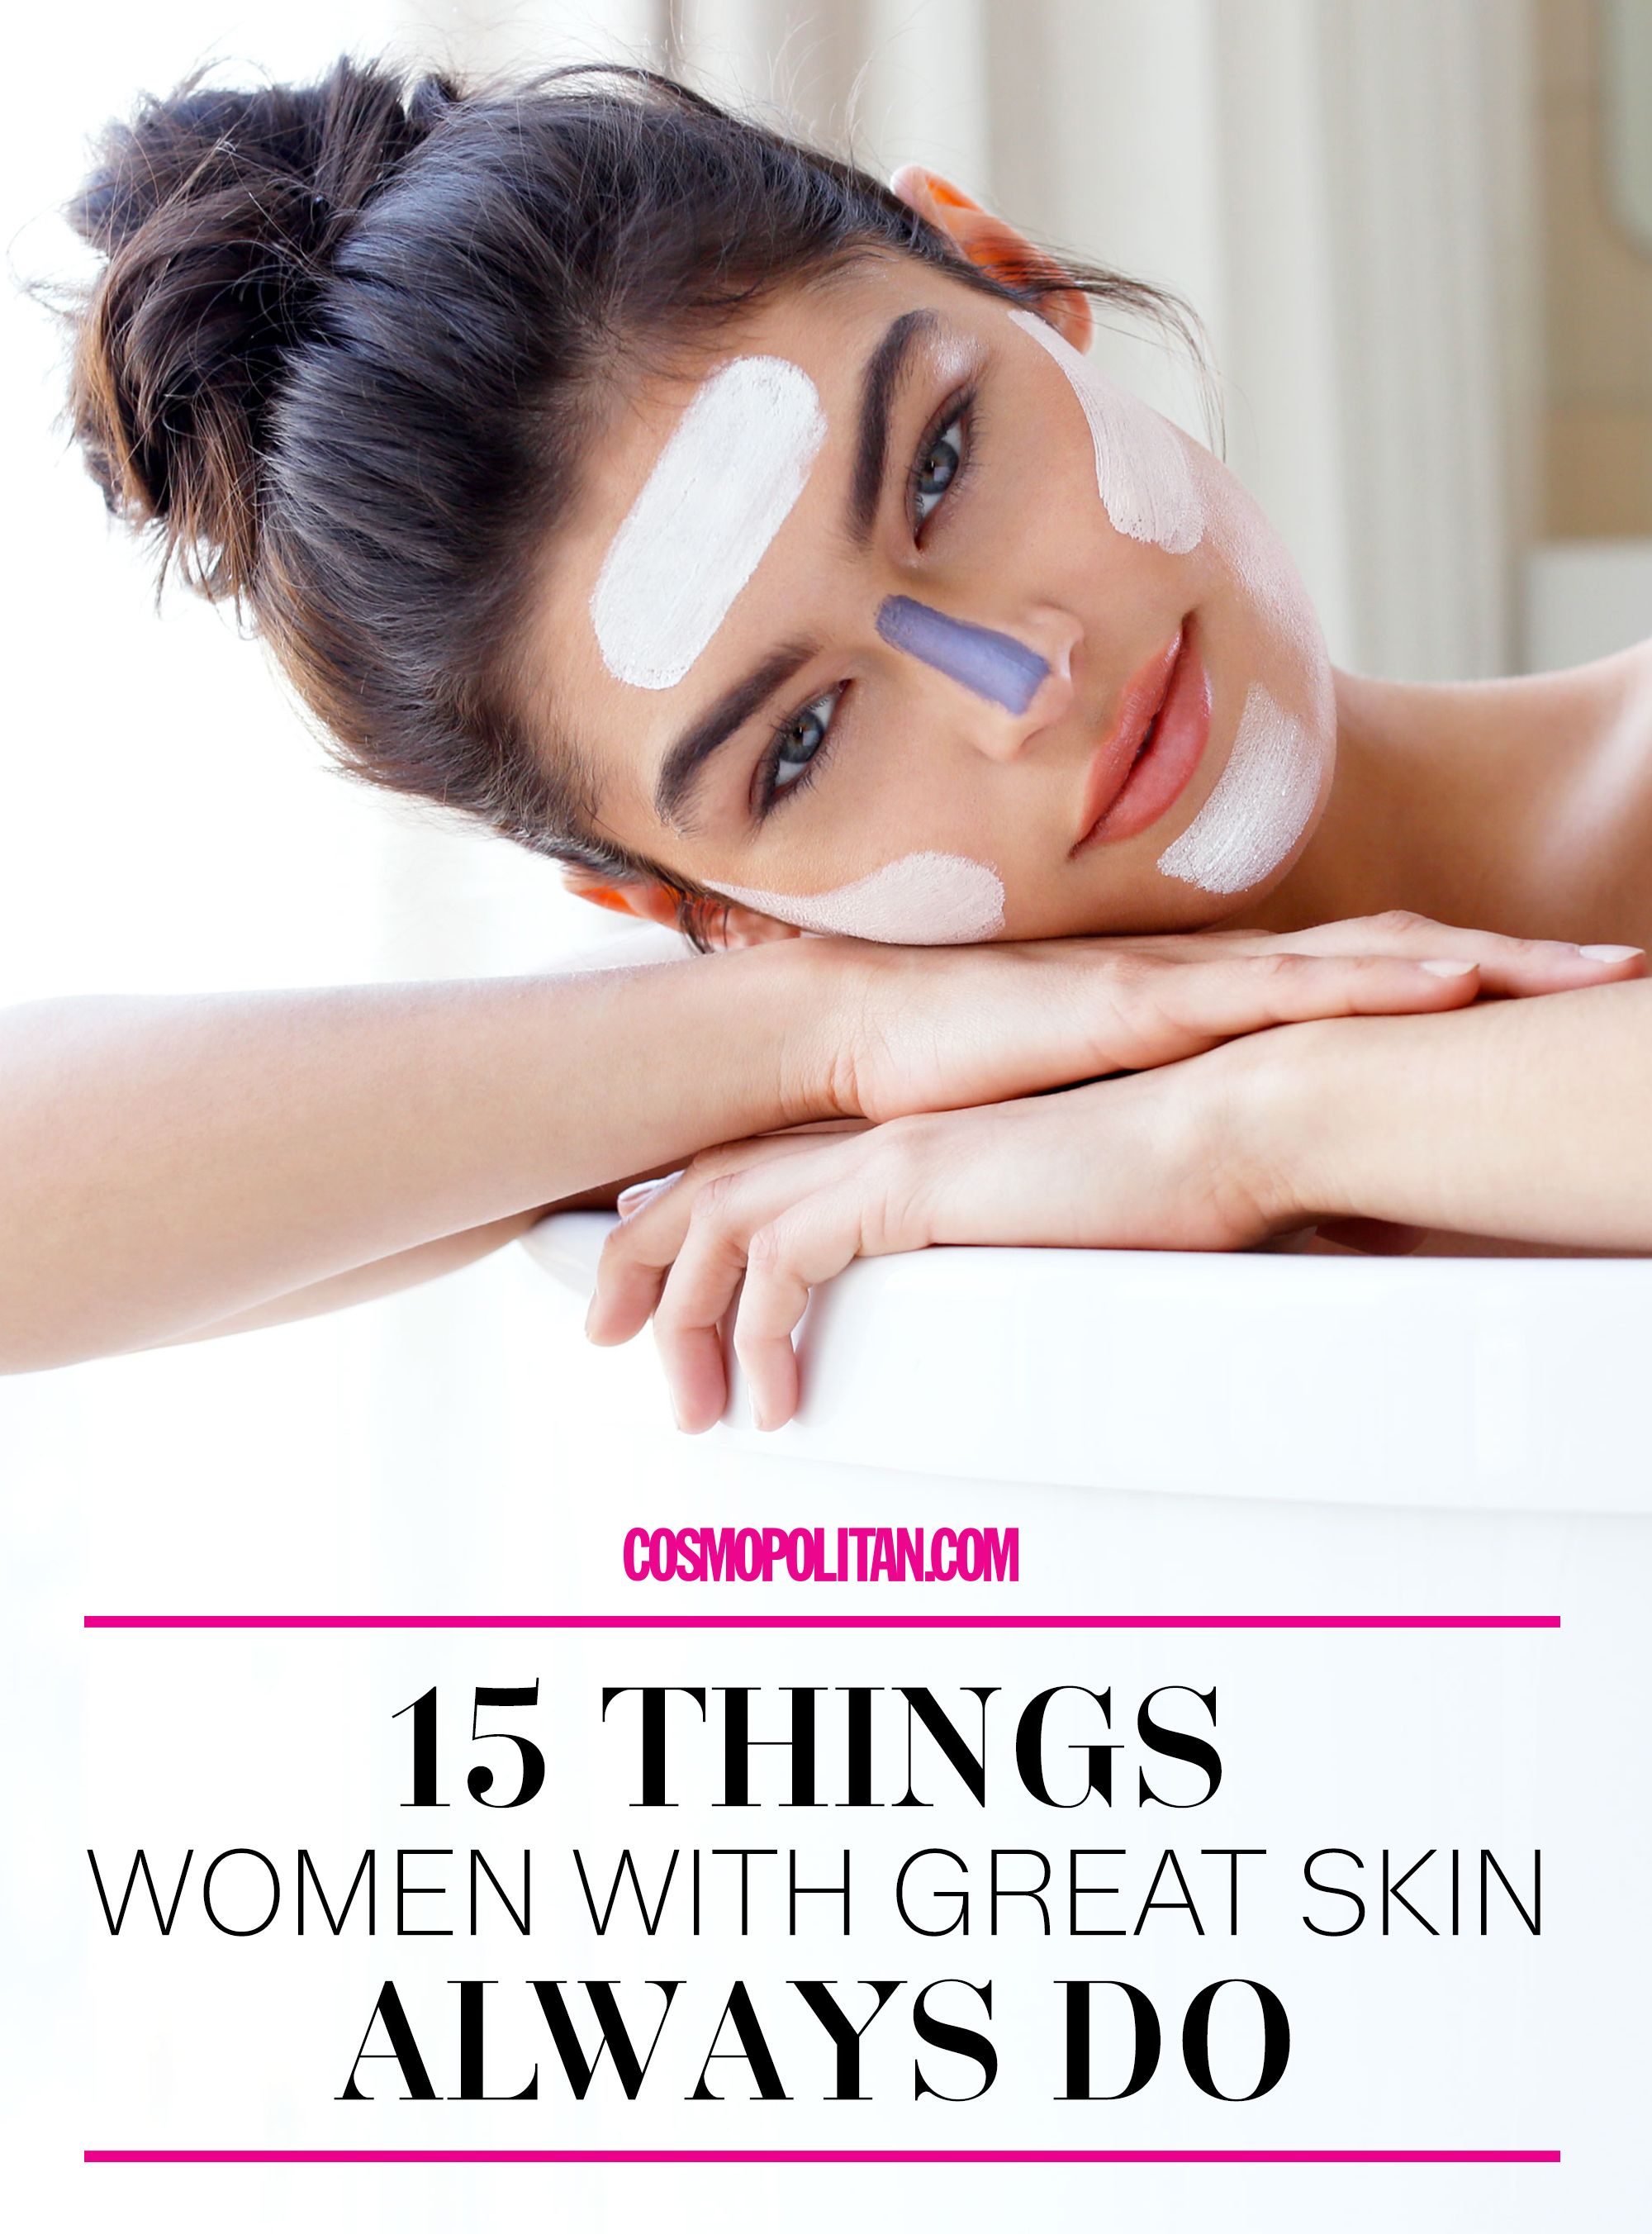 15 Things Women With Great Skin Always Do image